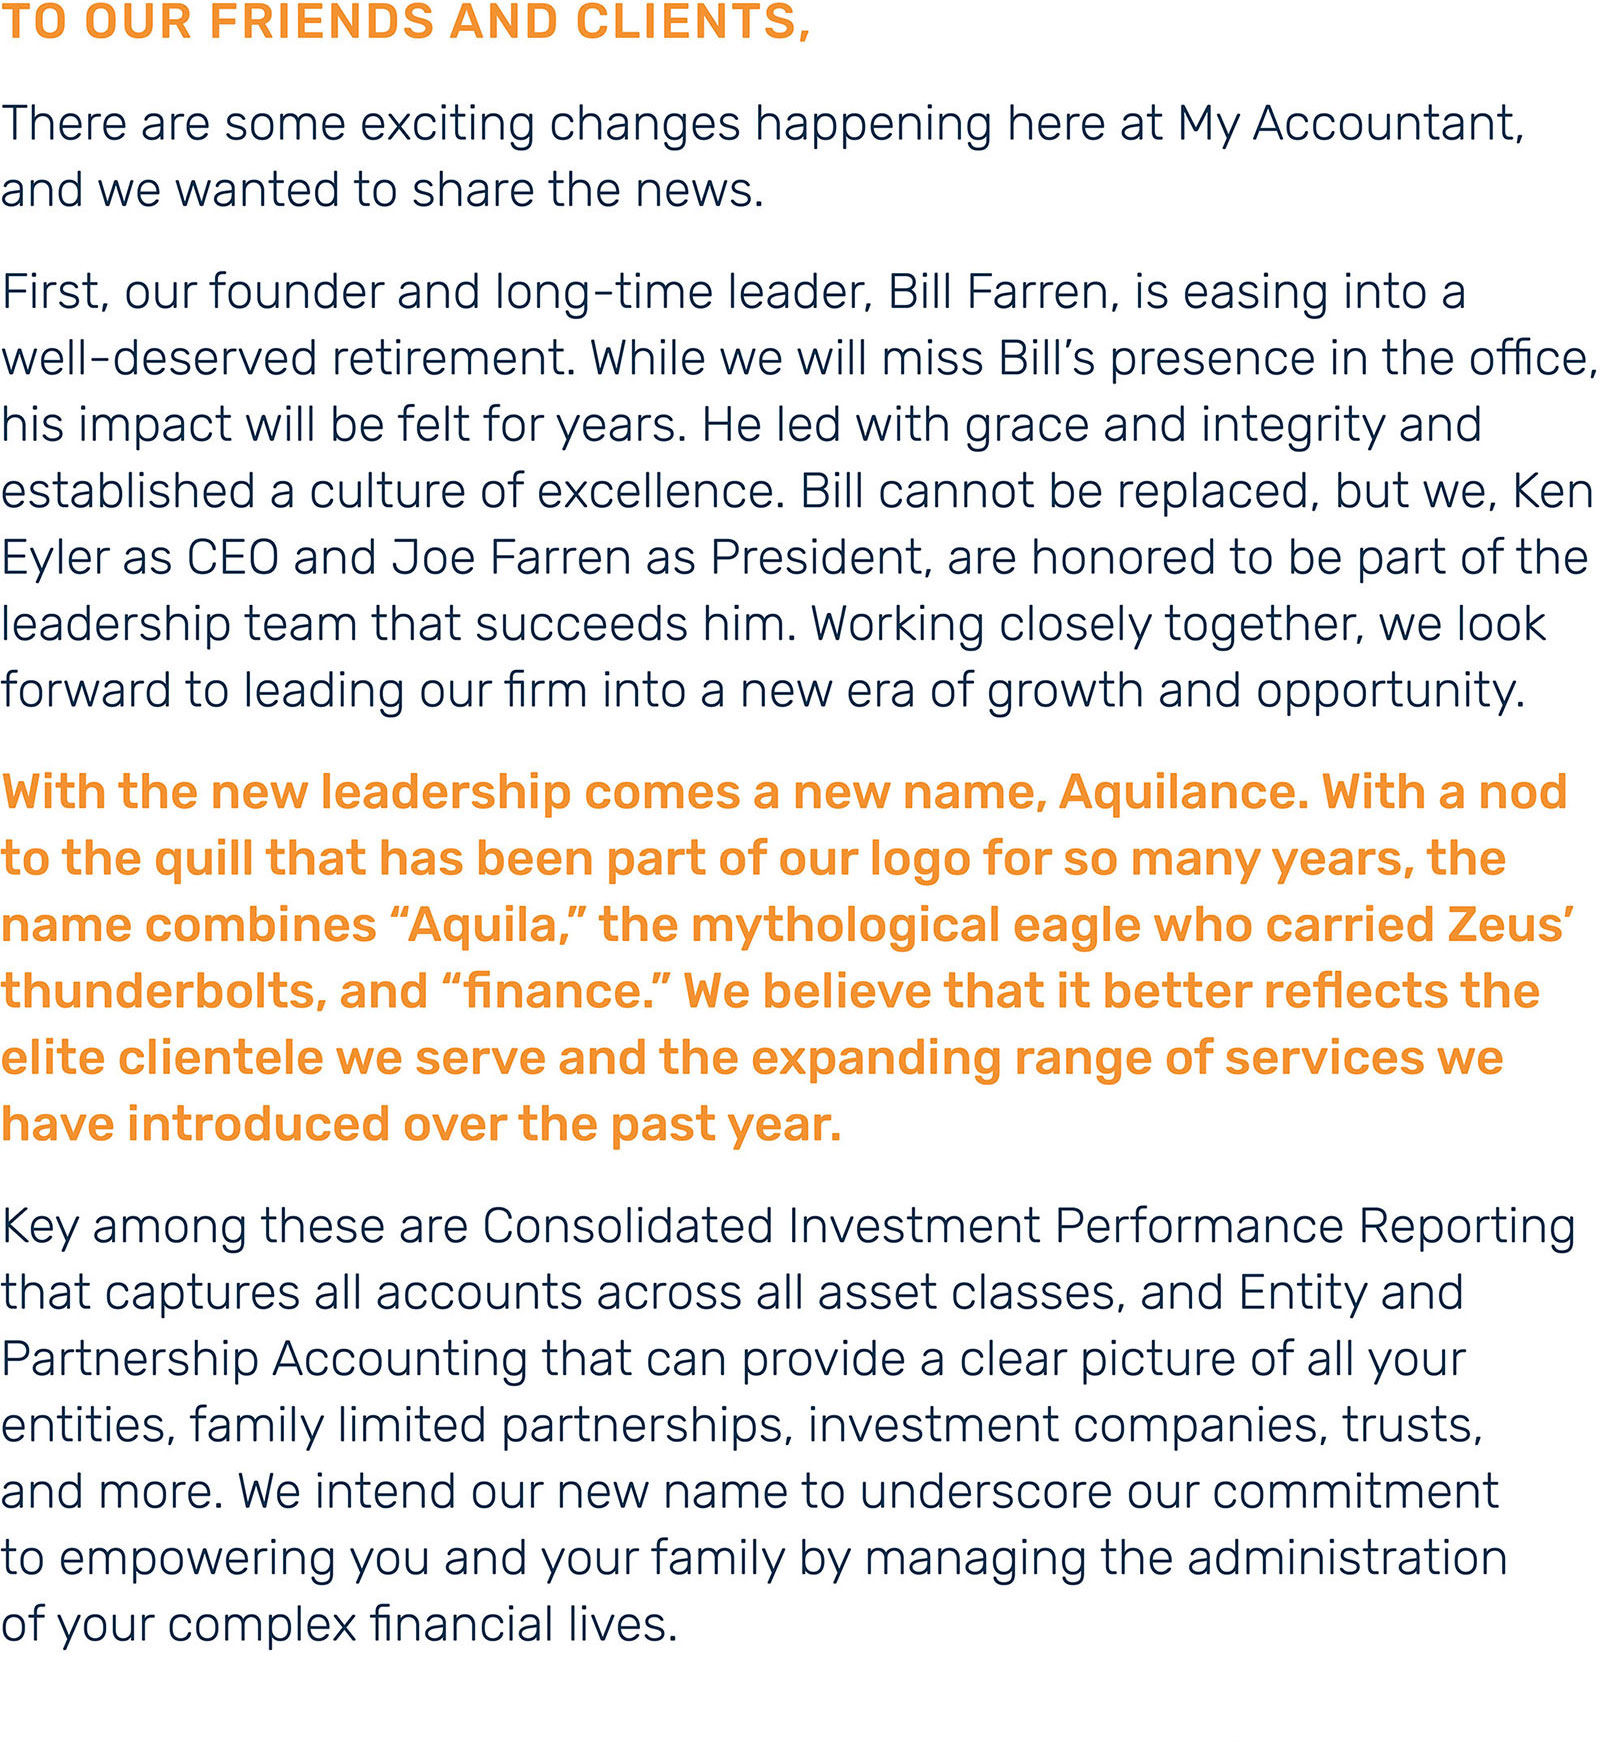 A note about the Aquilance name change and brand refresh addressed to clients